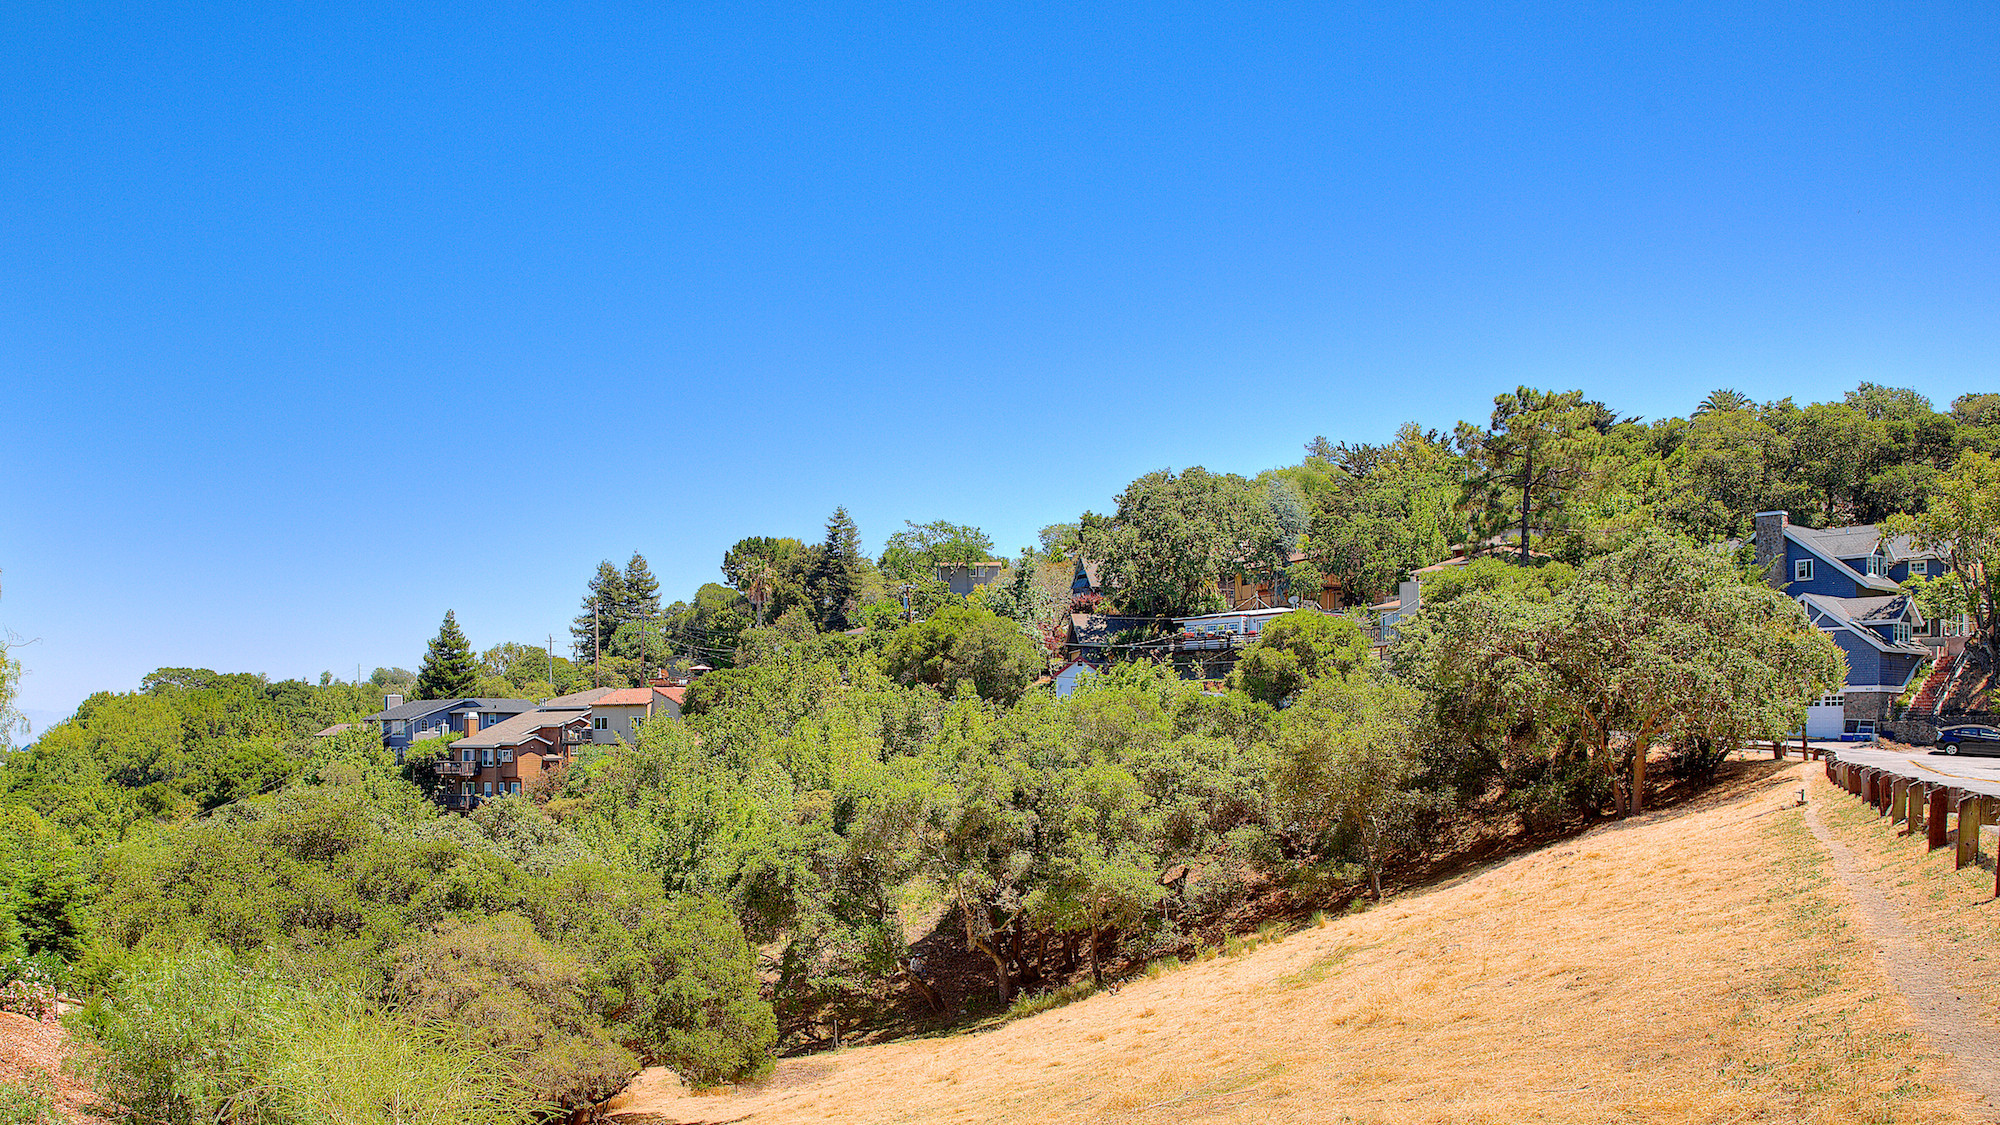 View of the roof tops and valley in the Cordilleras Heights/Emerald Hills area in Redwood City